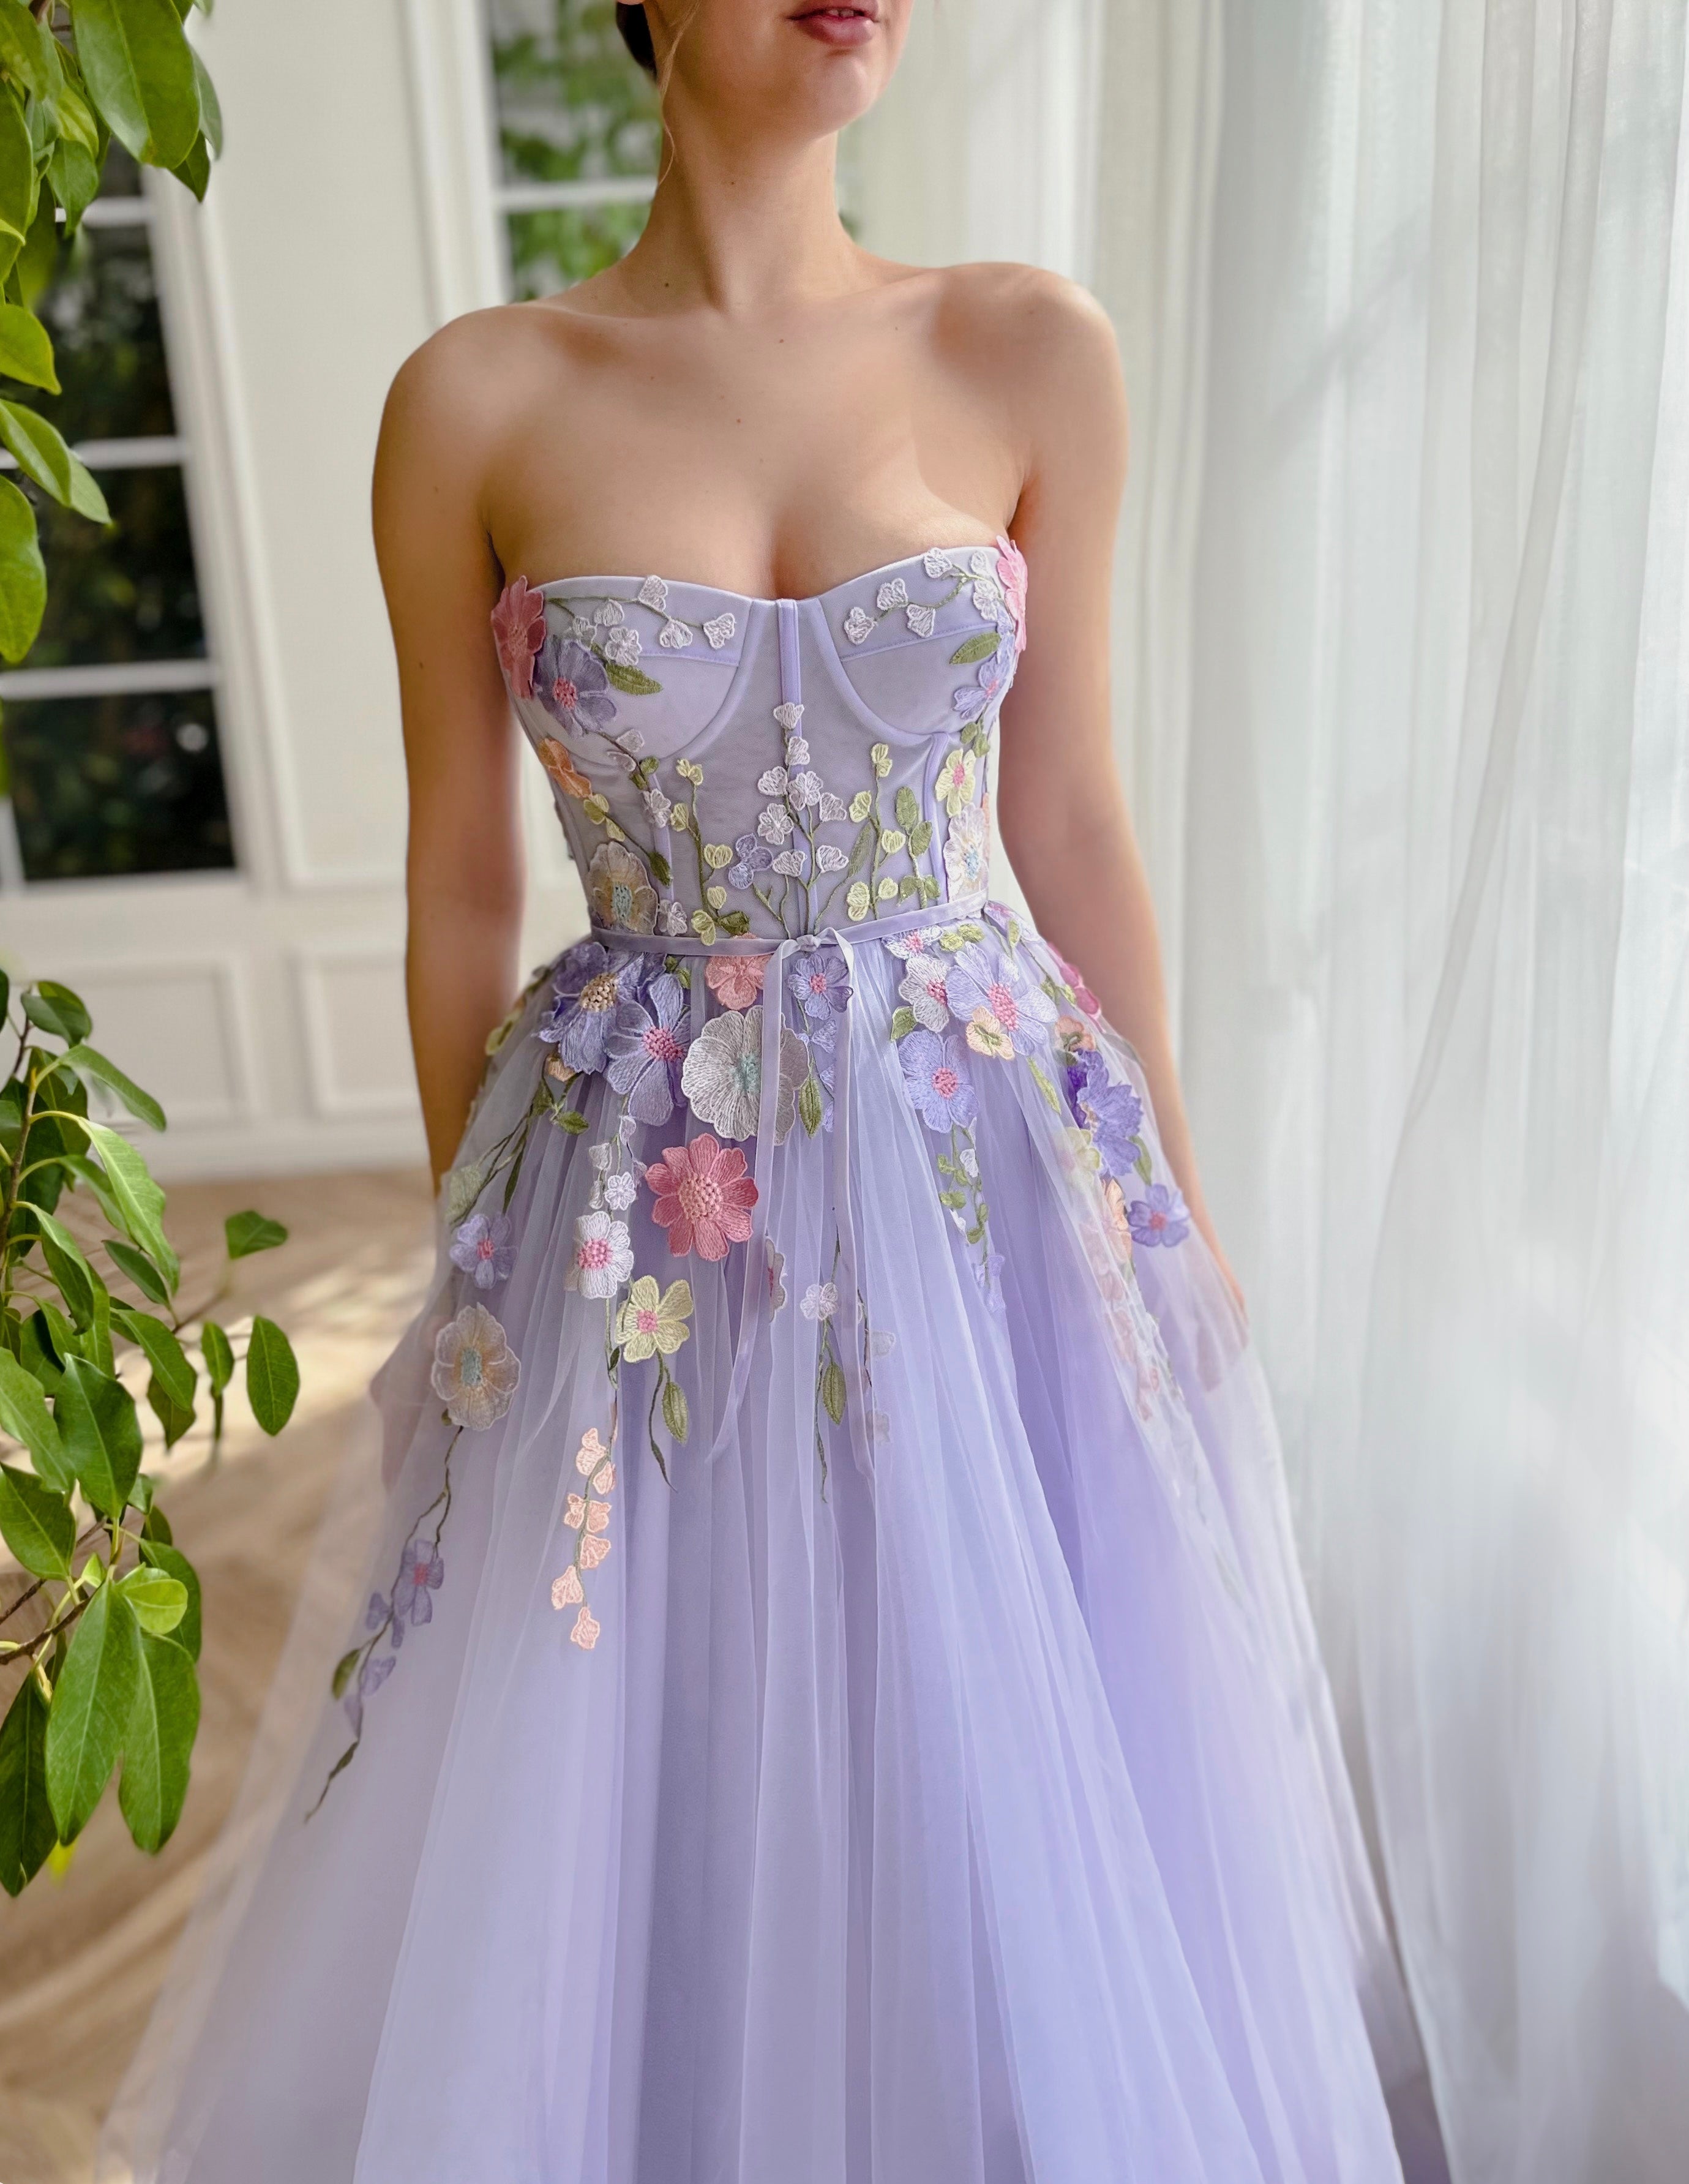 Purple A-Line dress with no sleeves and embroidery